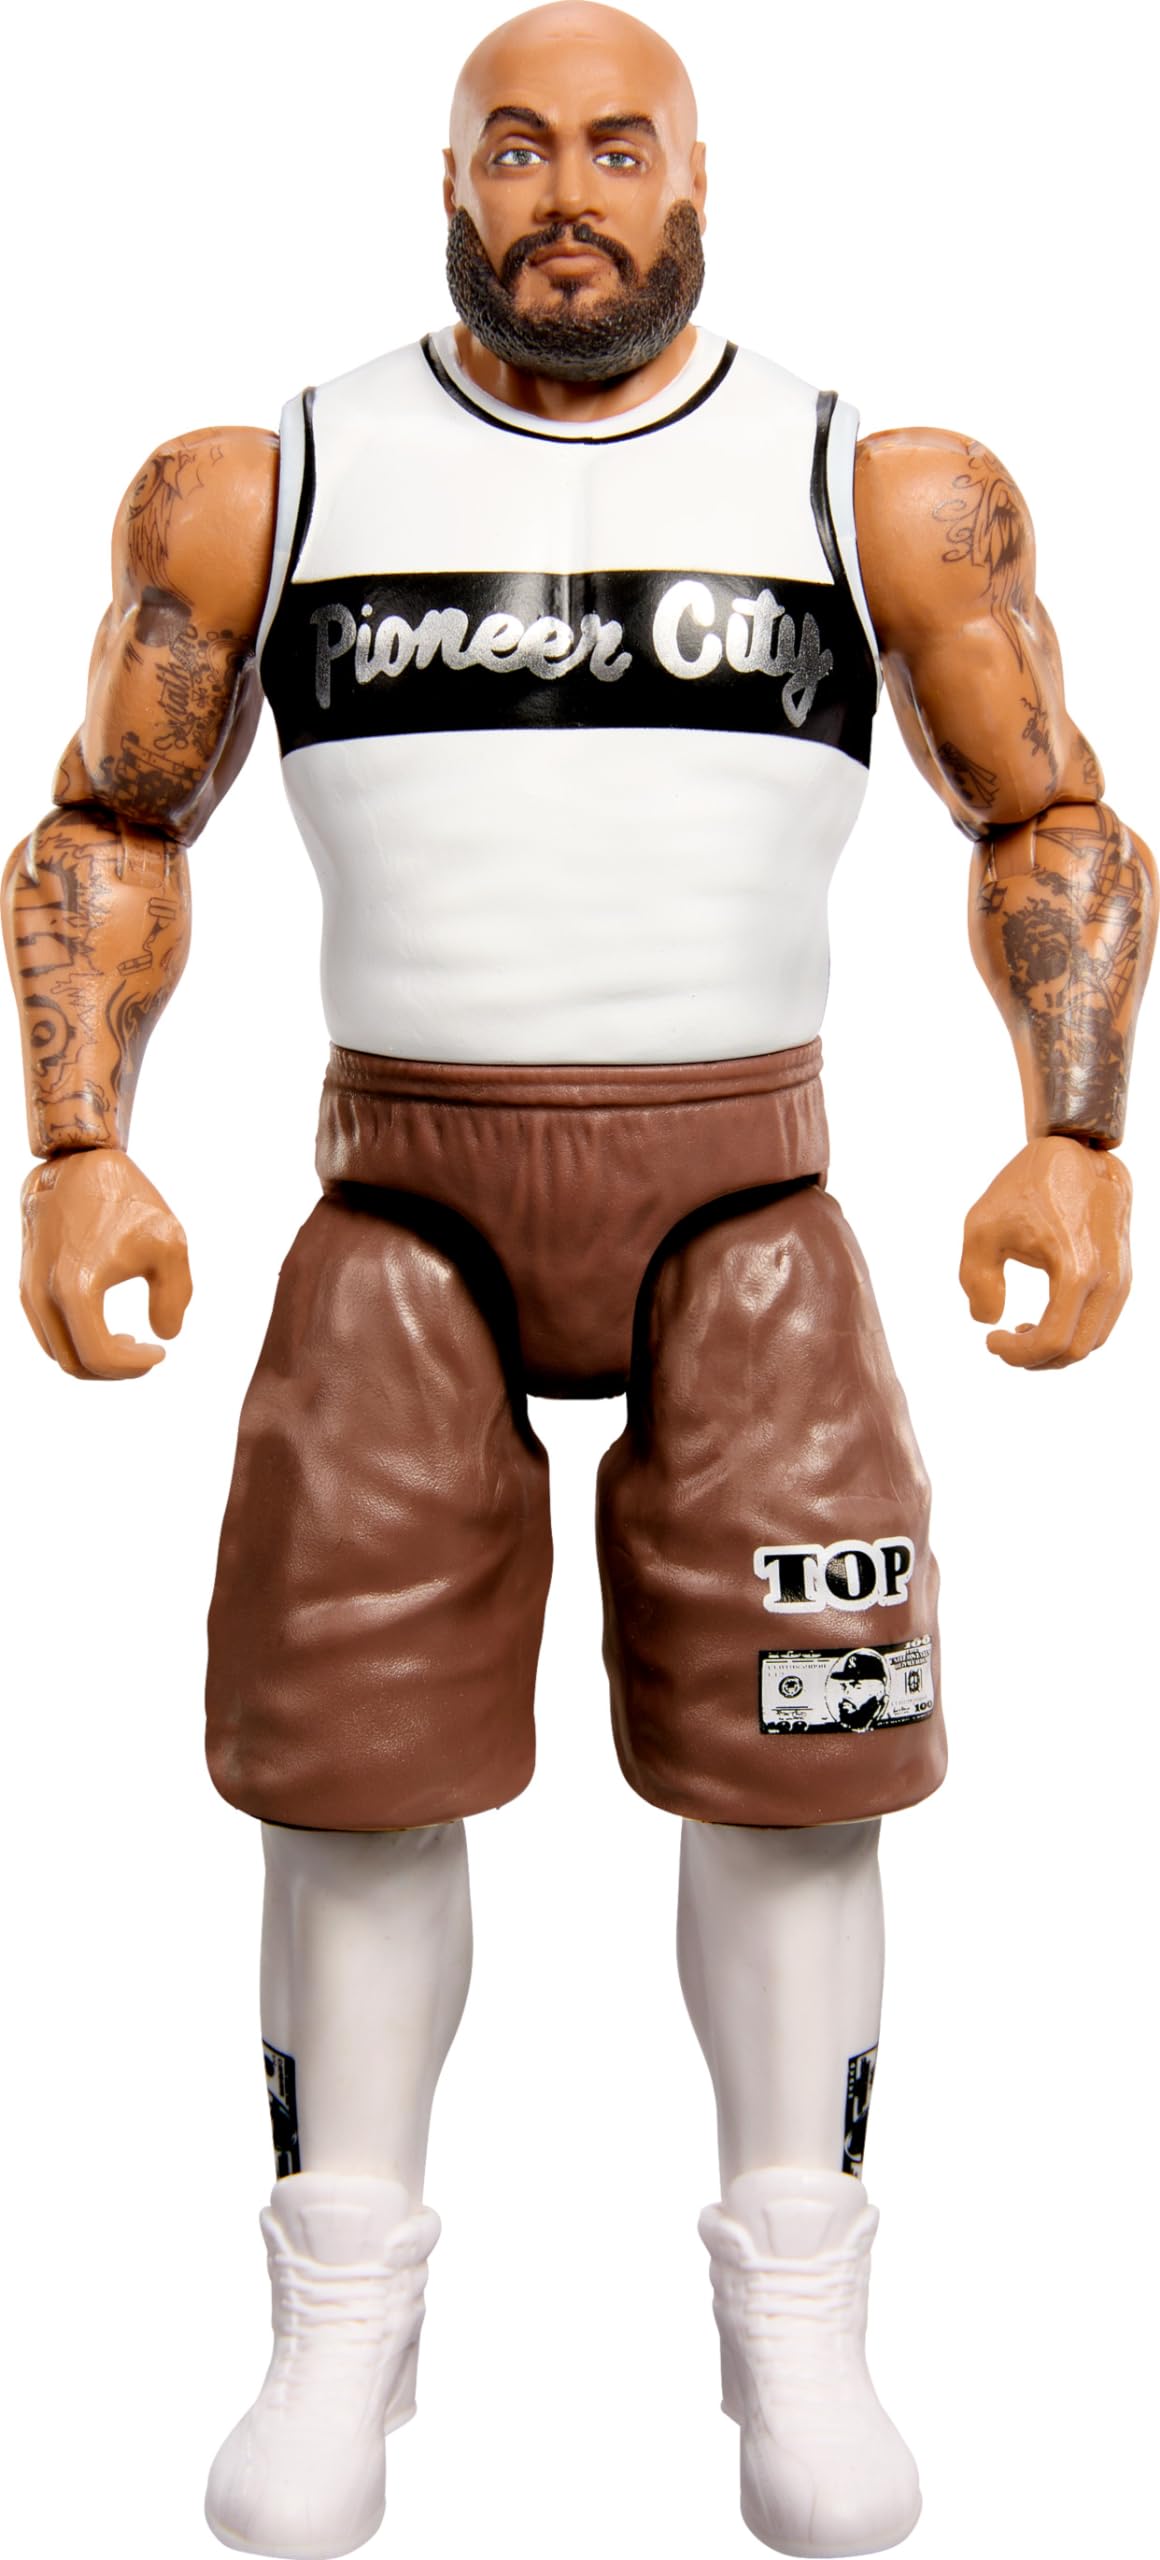 Mattel WWE Action Figure, 6-inch Collectible Top Dolla with 10 Articulation Points & Life-Like Look